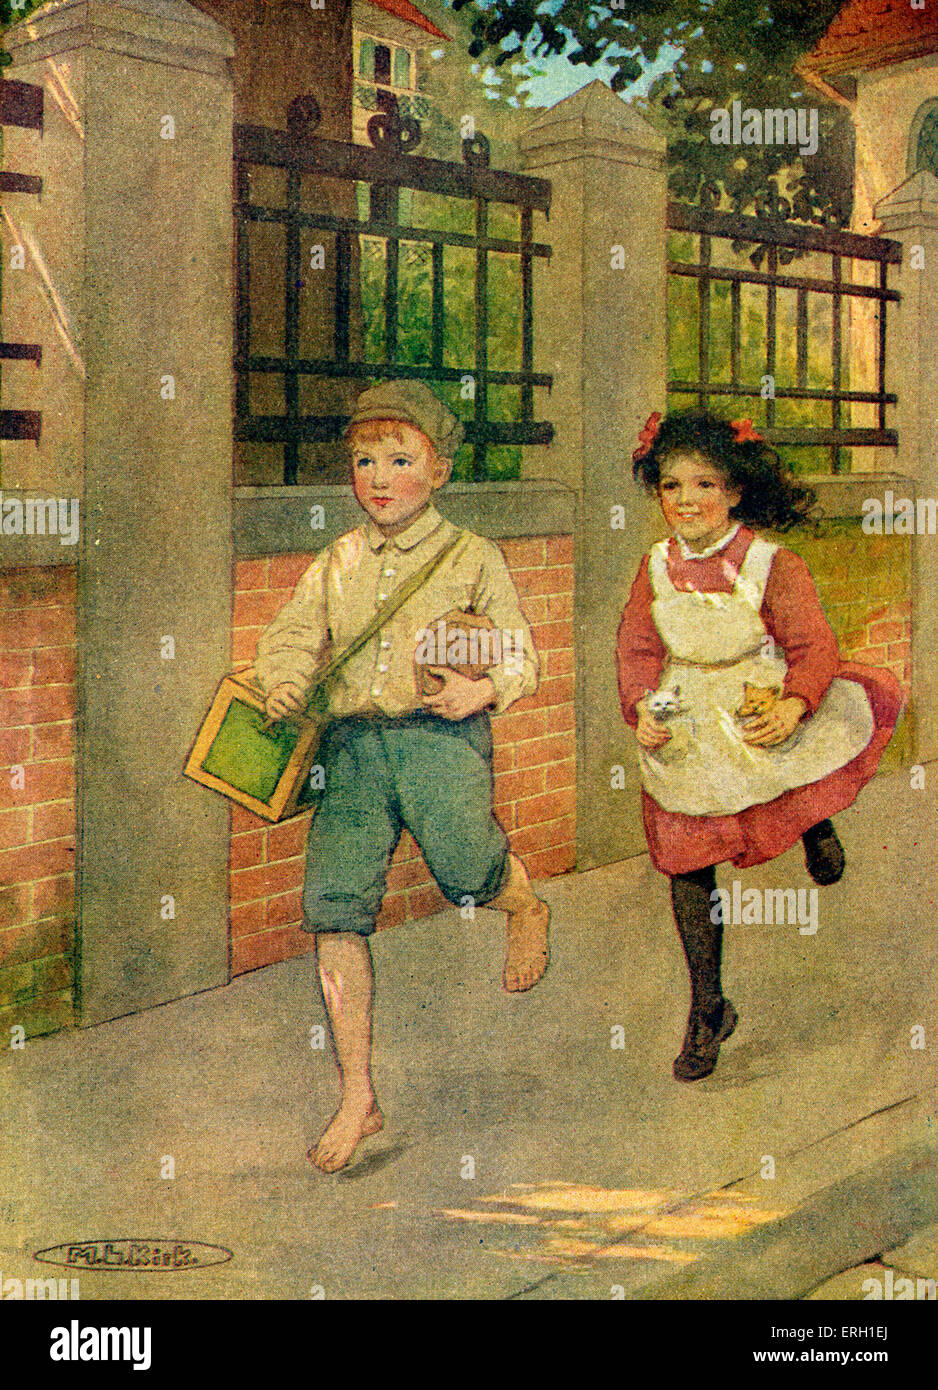 Heidi by Johanna Spyri. First published 1880. Caption reads: 'Off they started, and soon Heidi was pulling the door-bell'. Stock Photo